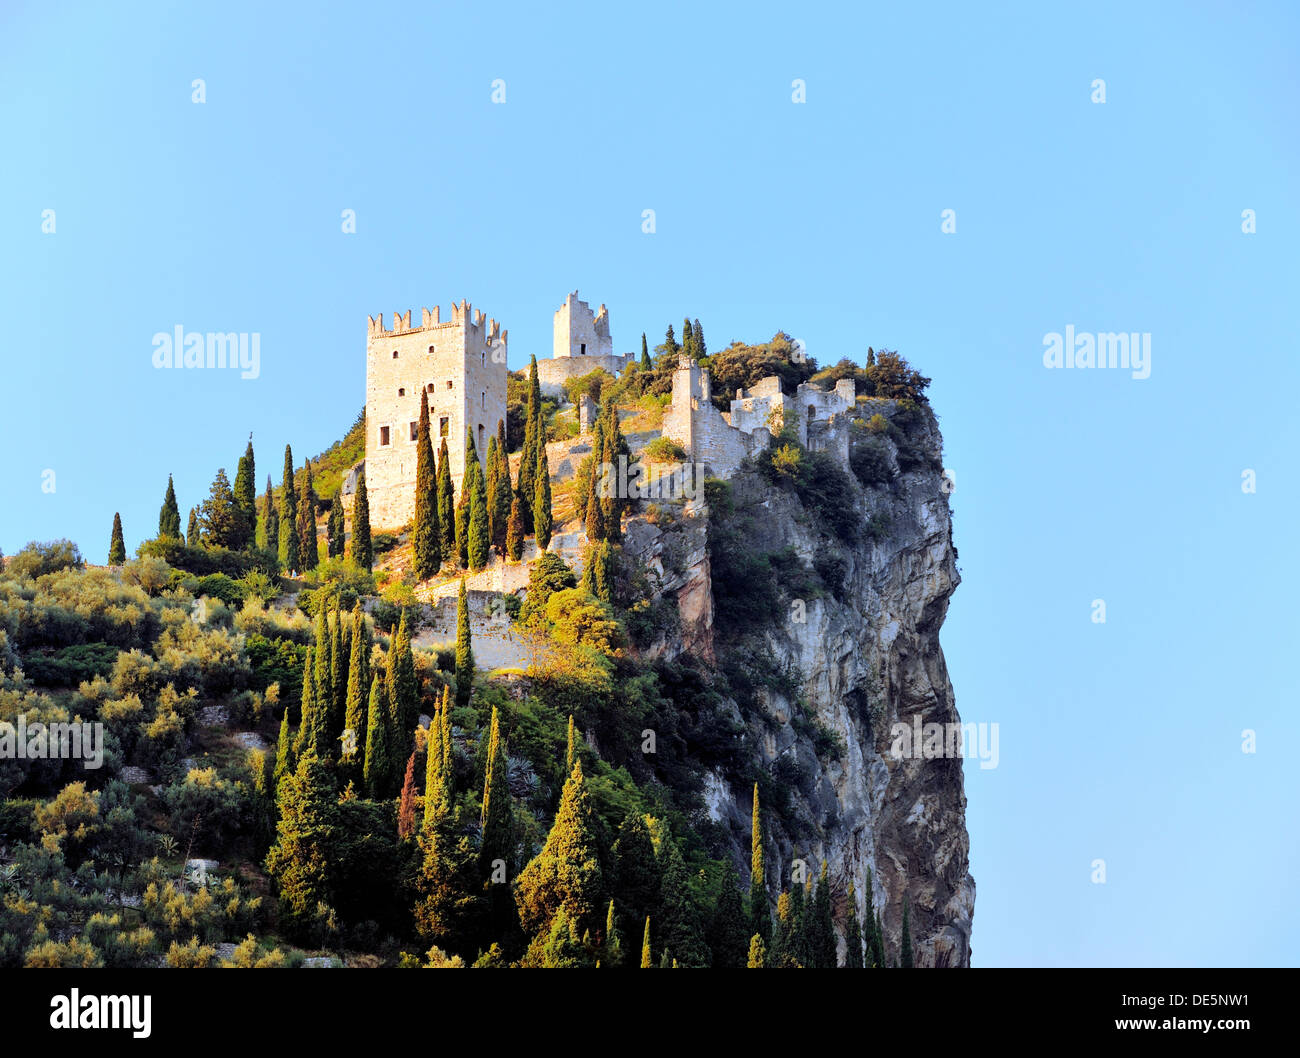 The Castello D'Arco hilltop castle on limestone cliffs above the town of Arco on Lake Garda, in the Alto Adige region of Italy Stock Photo